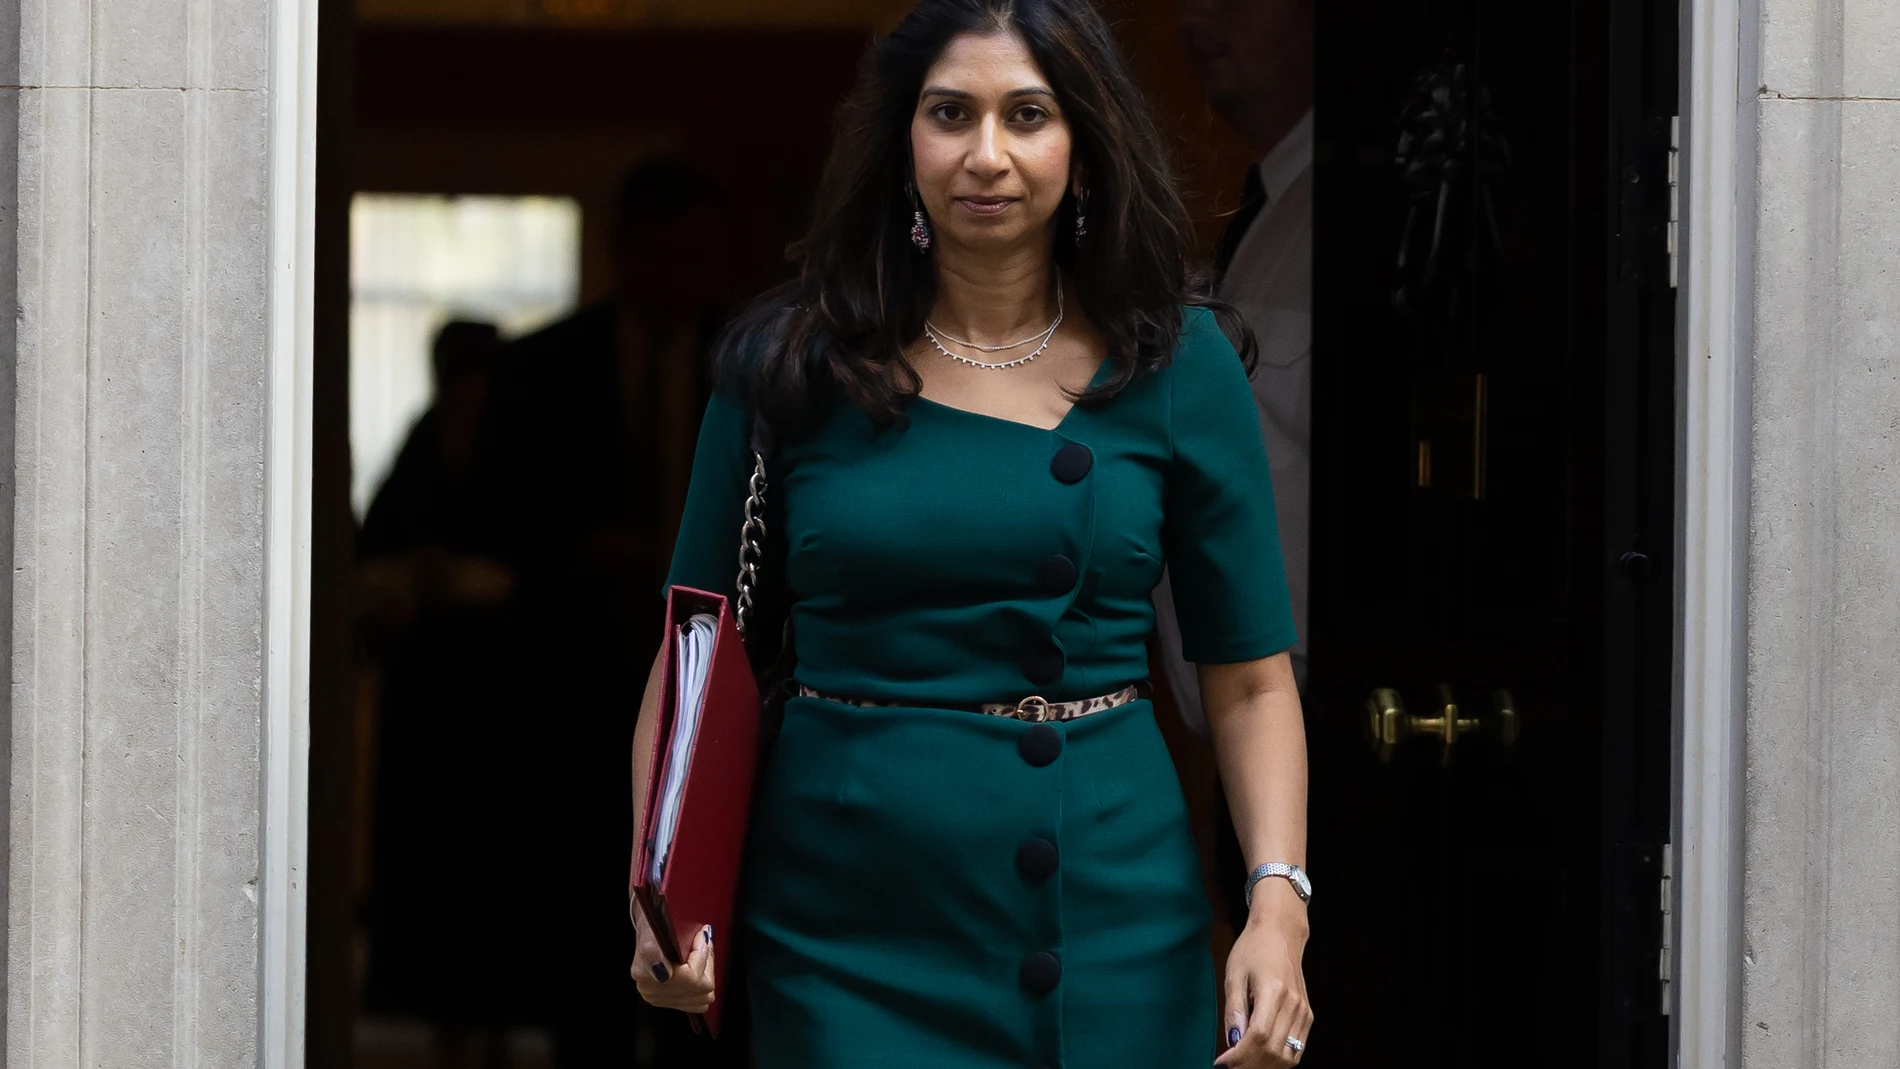 September 5, 2023, London, United Kingdom: Suella Braverman leaves a cabinet meeting in Downing Street, London. Last week, Prime Minister Rishi Sunak carried out a mini reshuffle of his cabinet ahead of a general election expected next year. (Foto de ARCHIVO) 05/09/2023